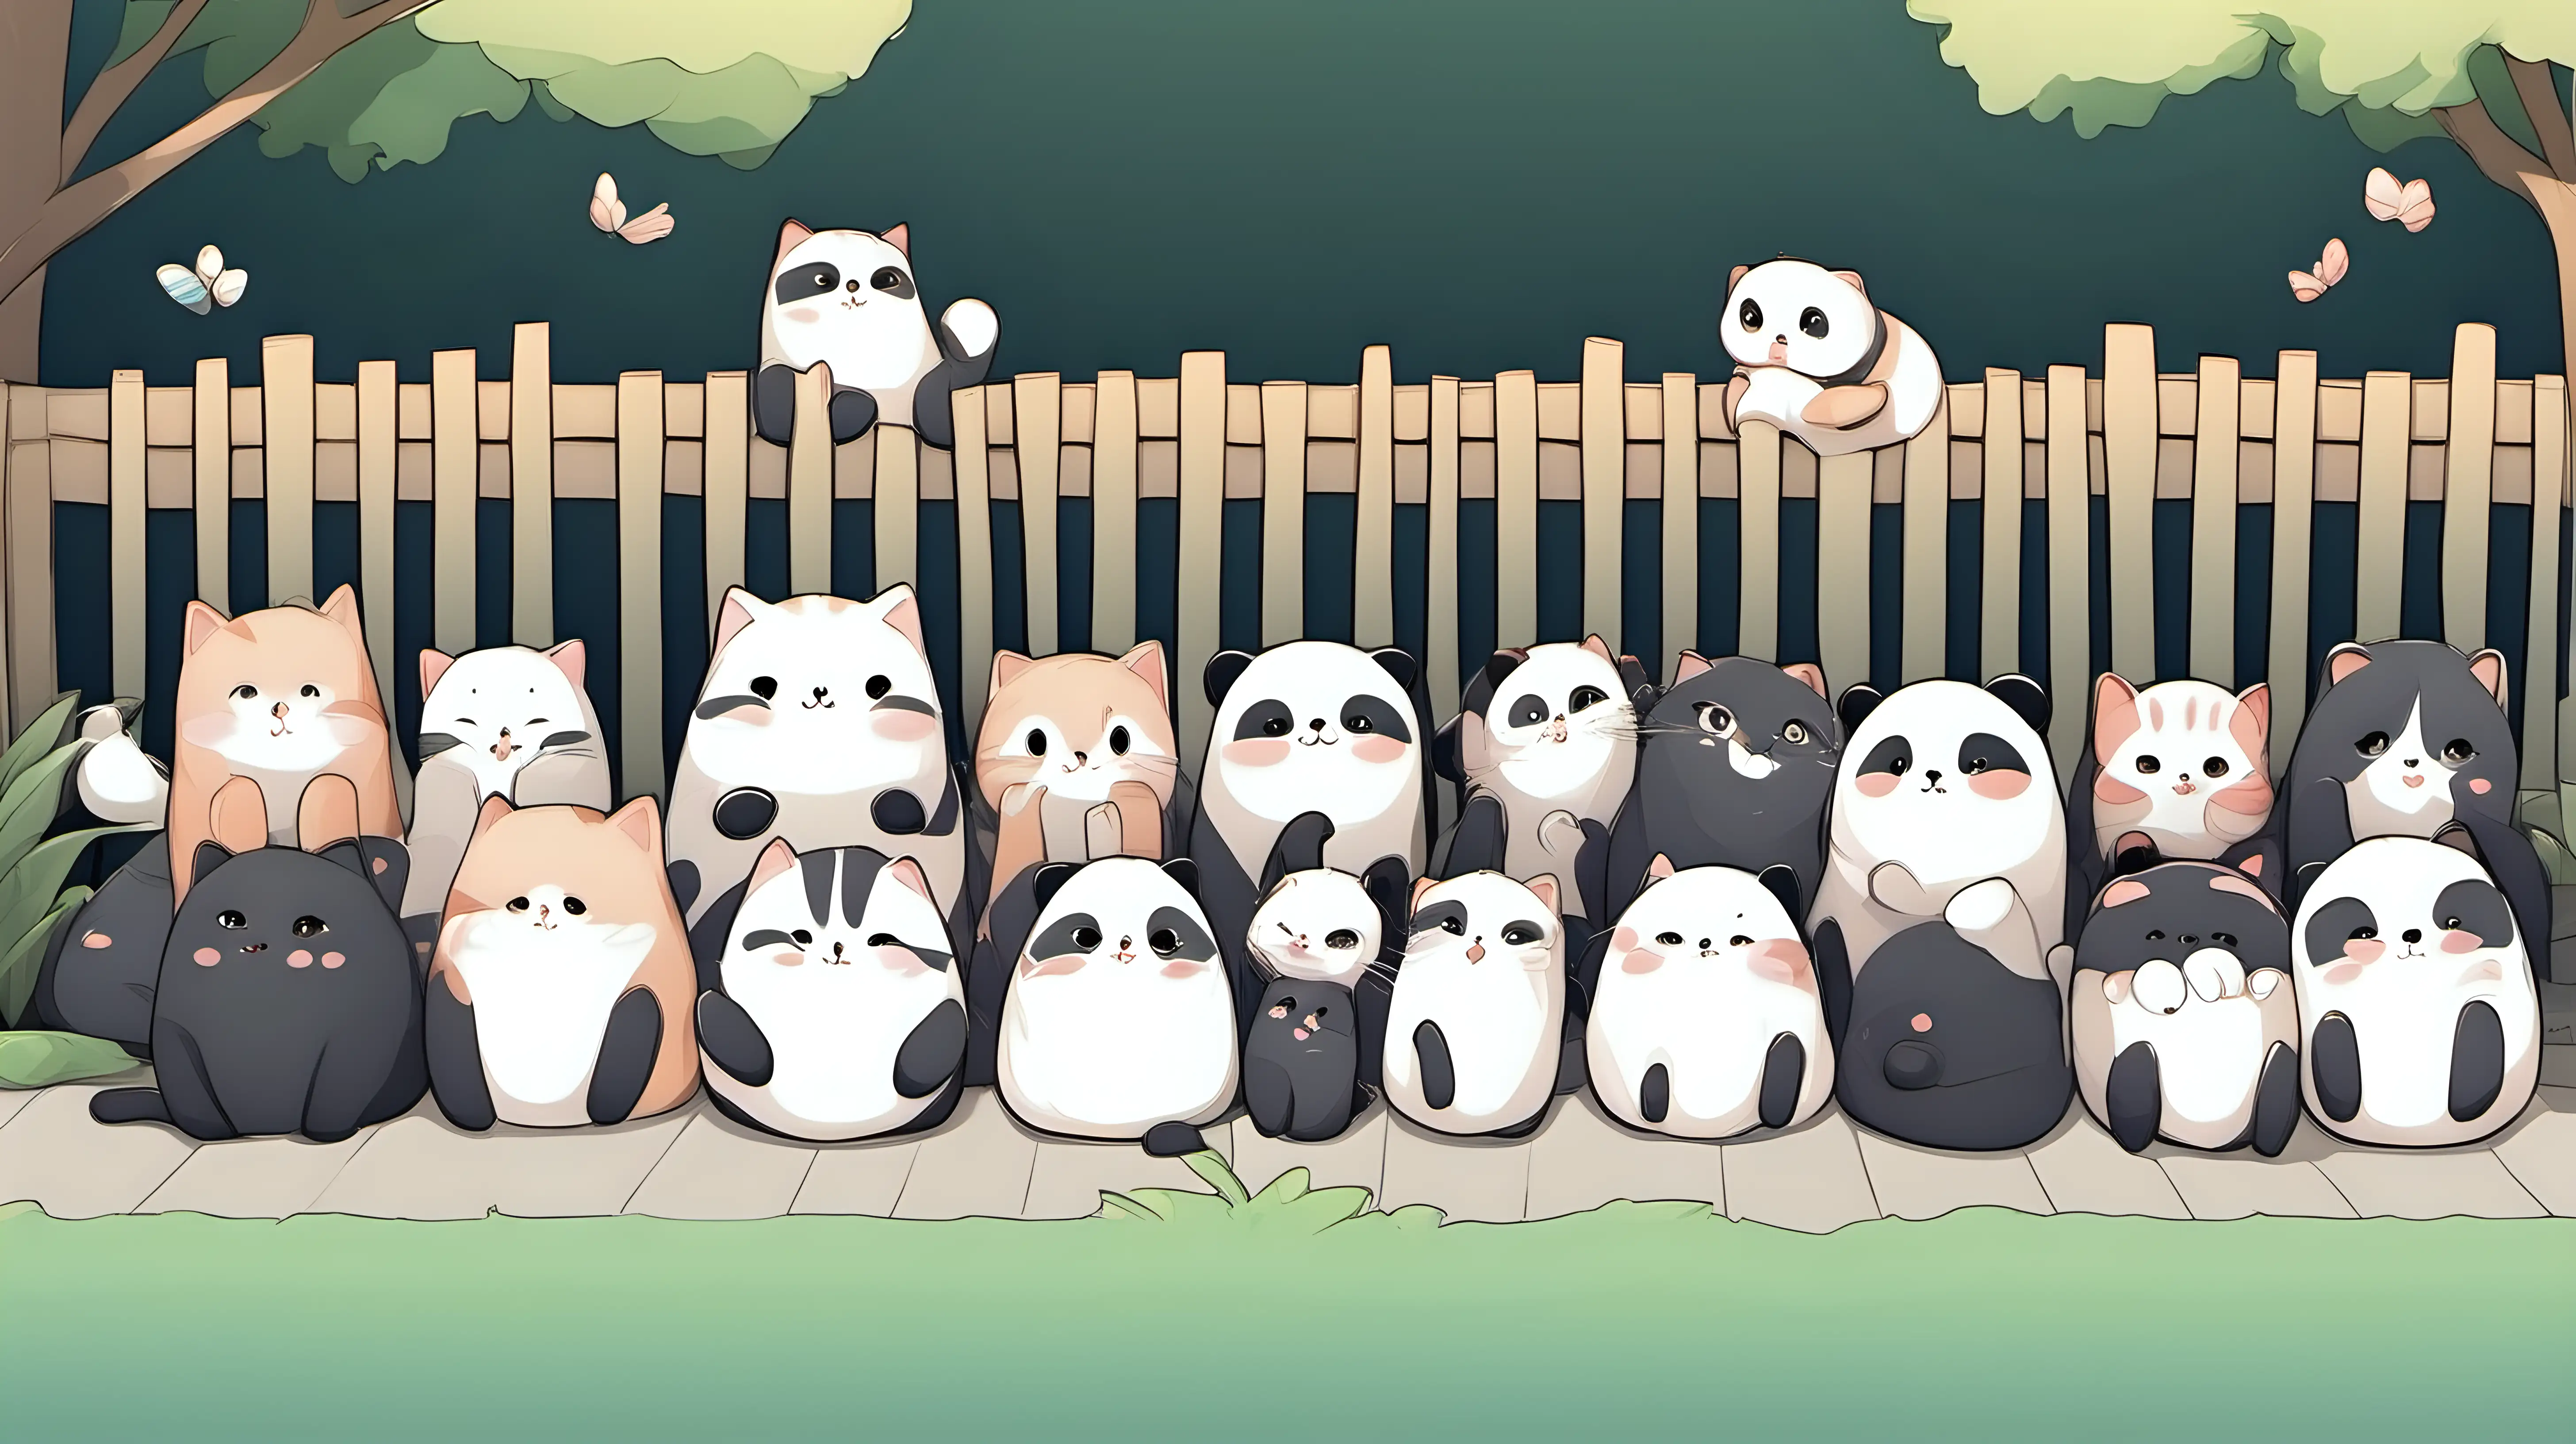 a blank place in the middle of image ,cute cats and pandas on sidelines